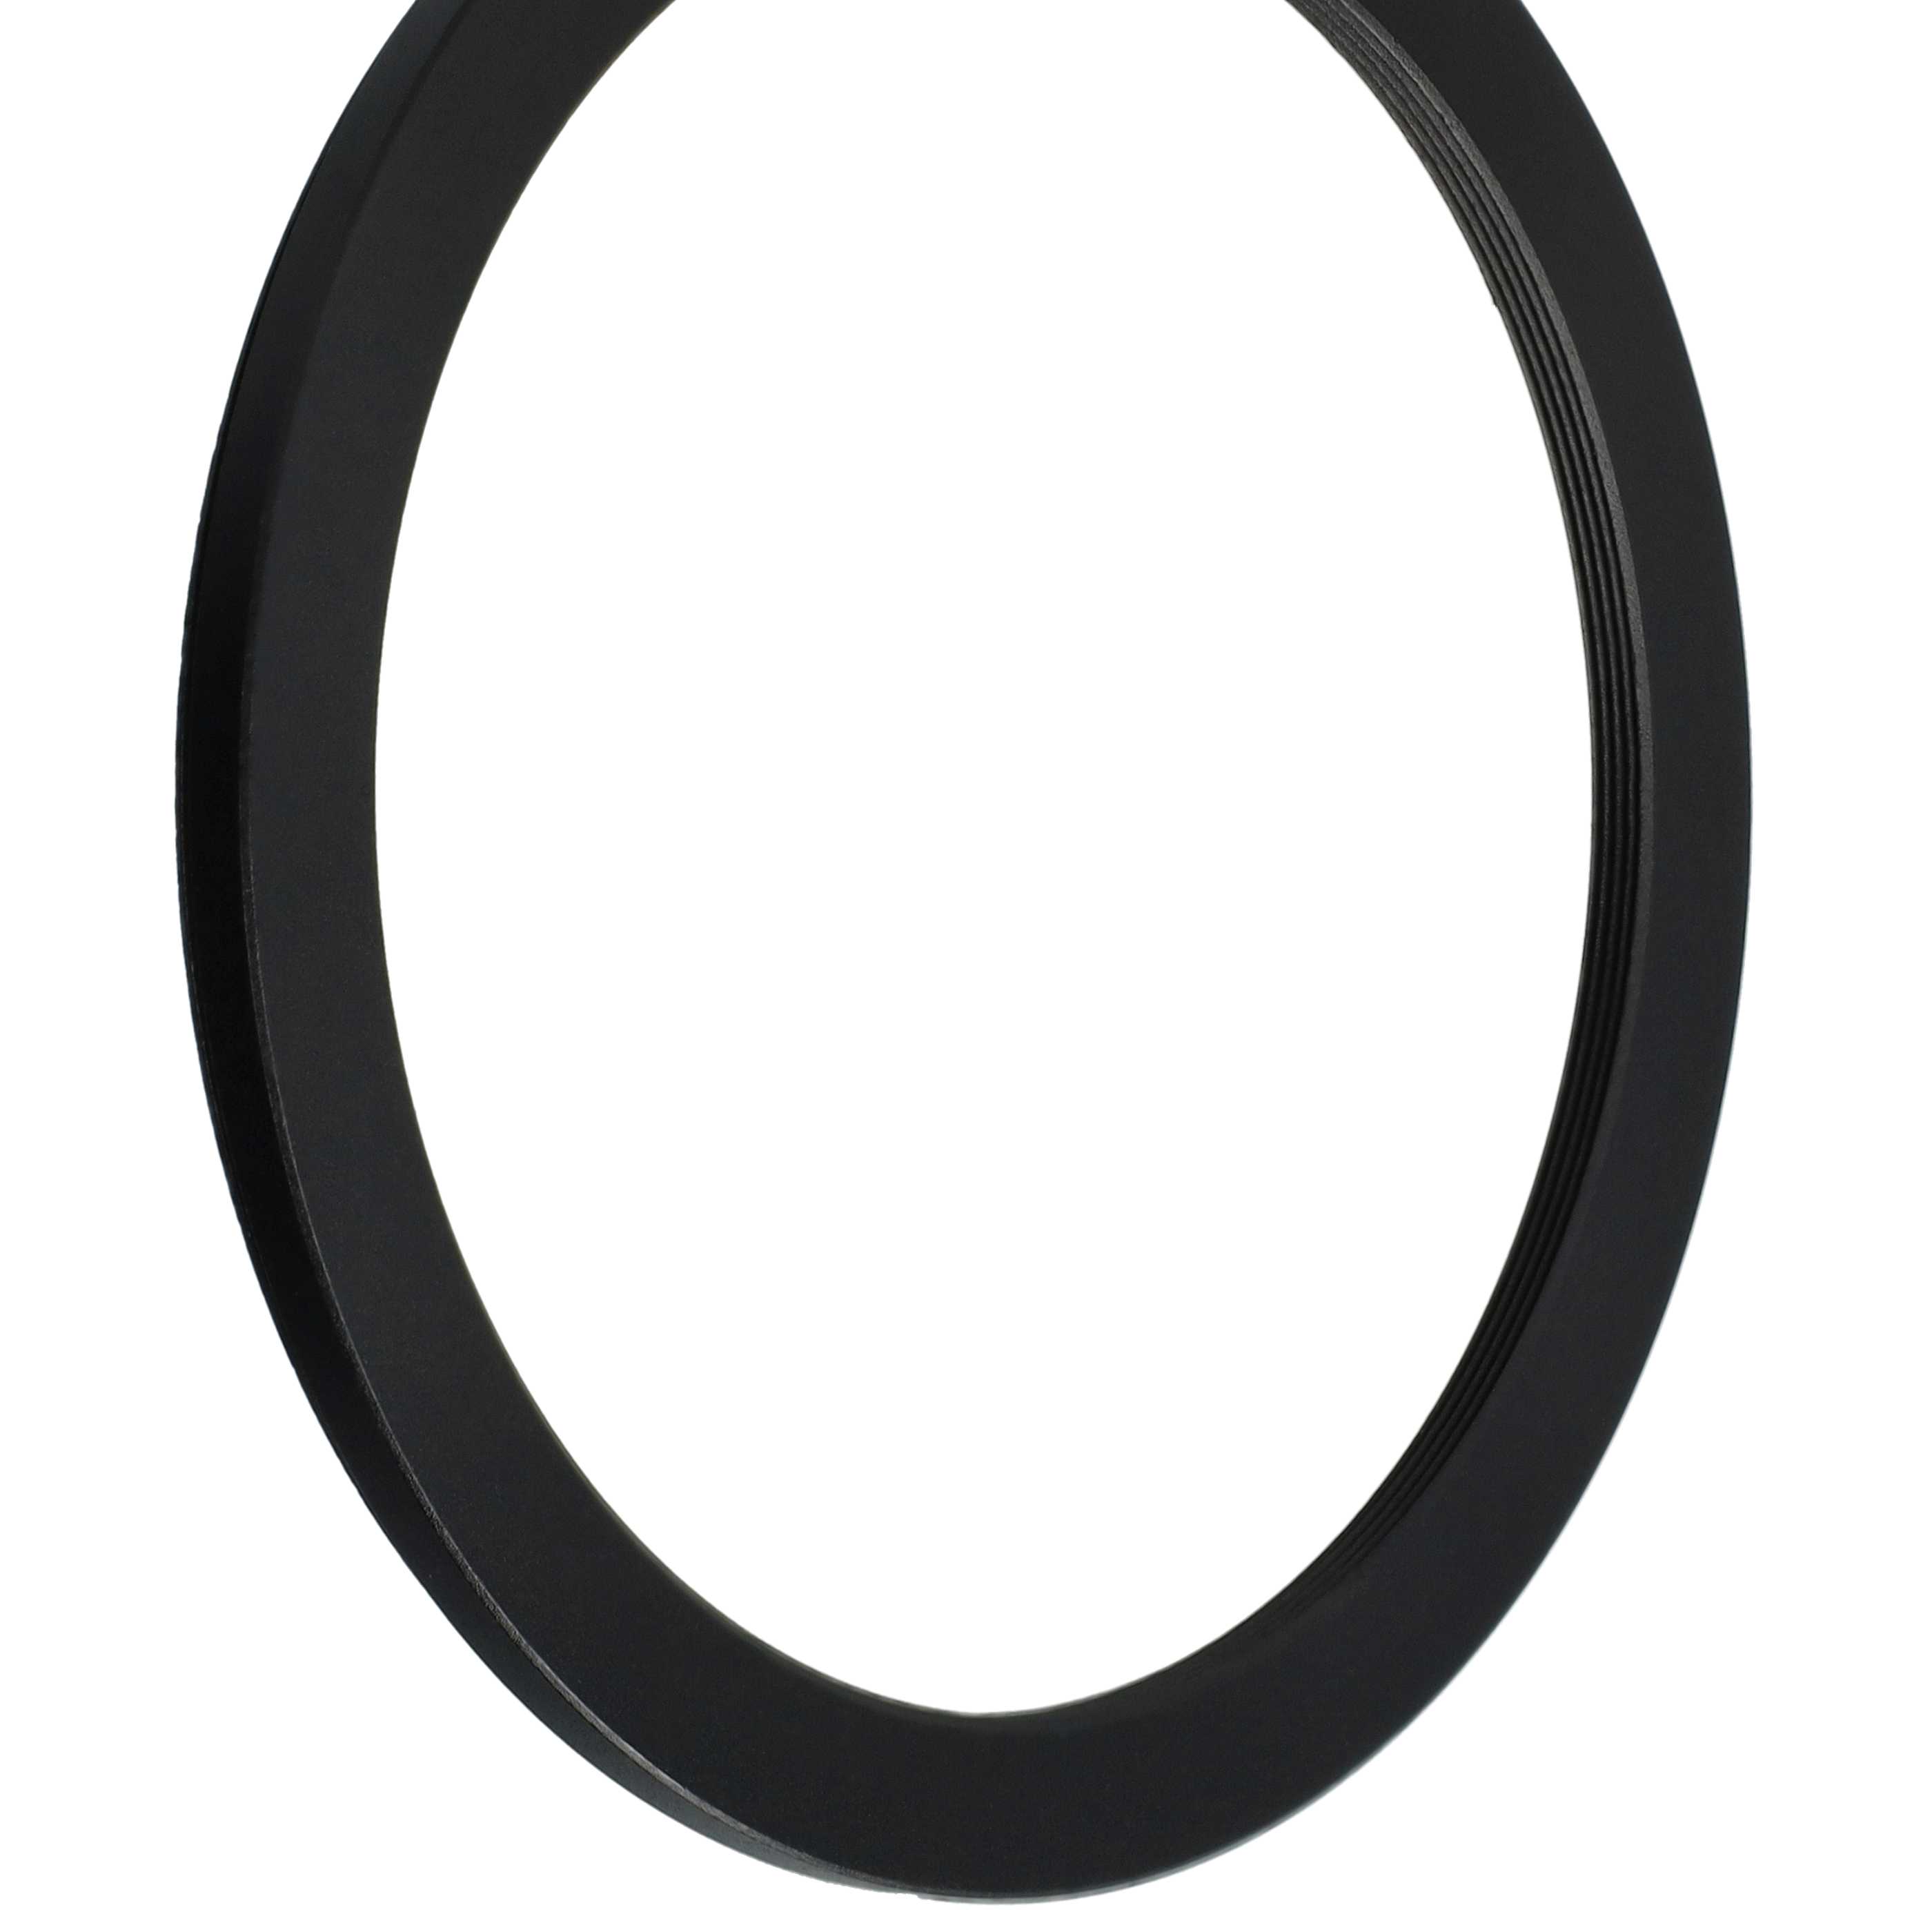 Step-Down Ring Adapter from 95 mm to 82 mm suitable for Camera Lens - Filter Adapter, metal